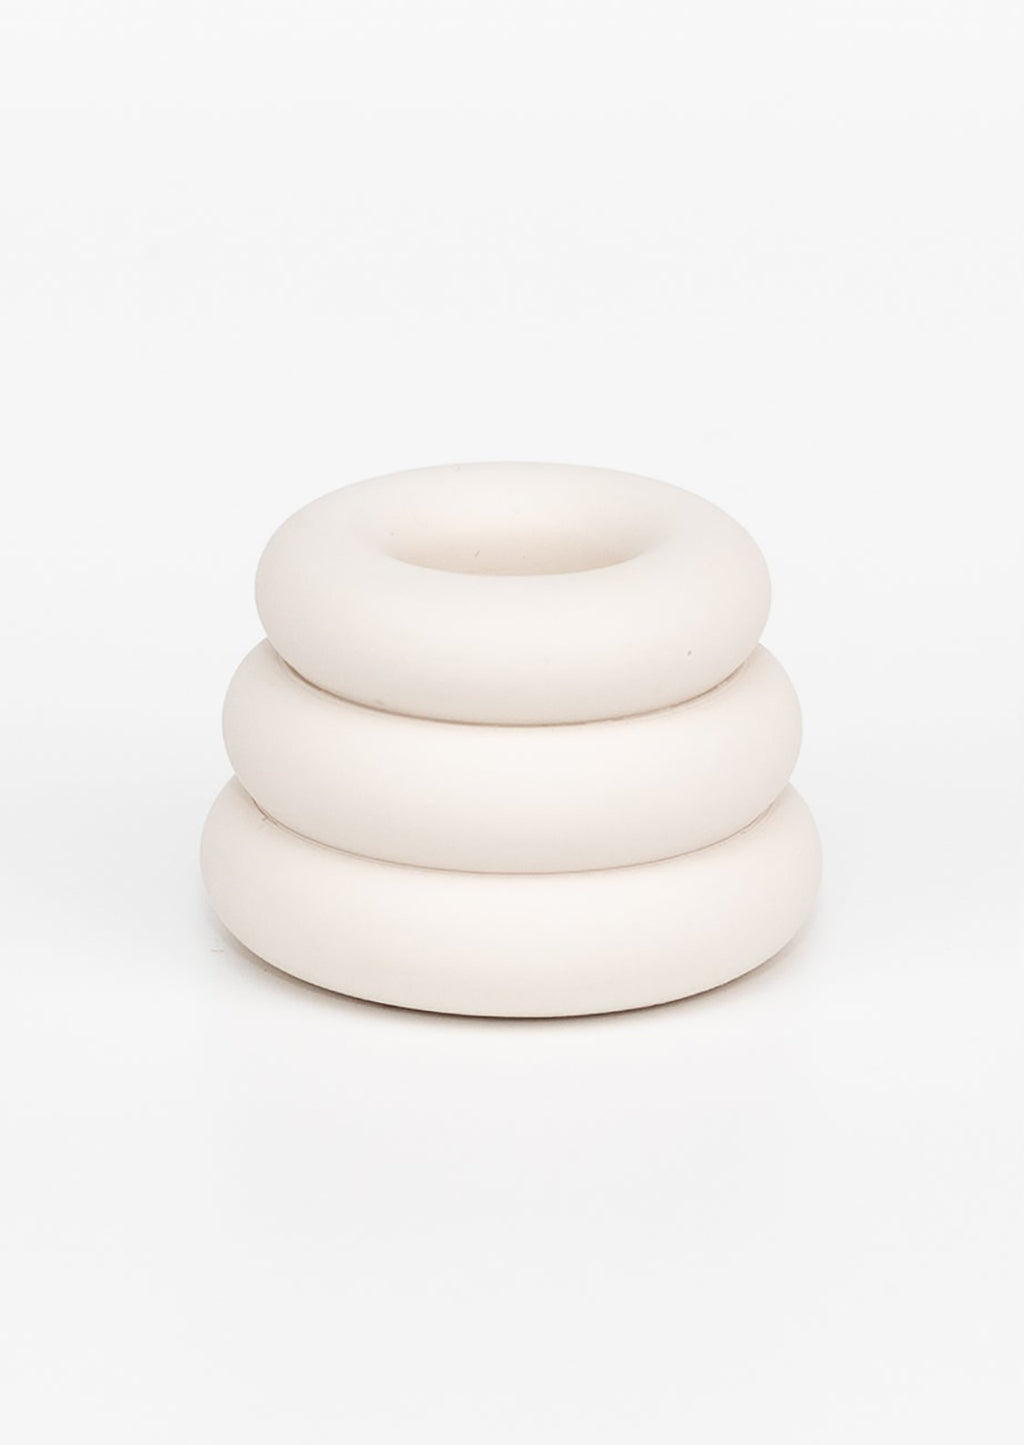 Chalk White: A taper candle holder with 3-layer stacked donut shape in white.